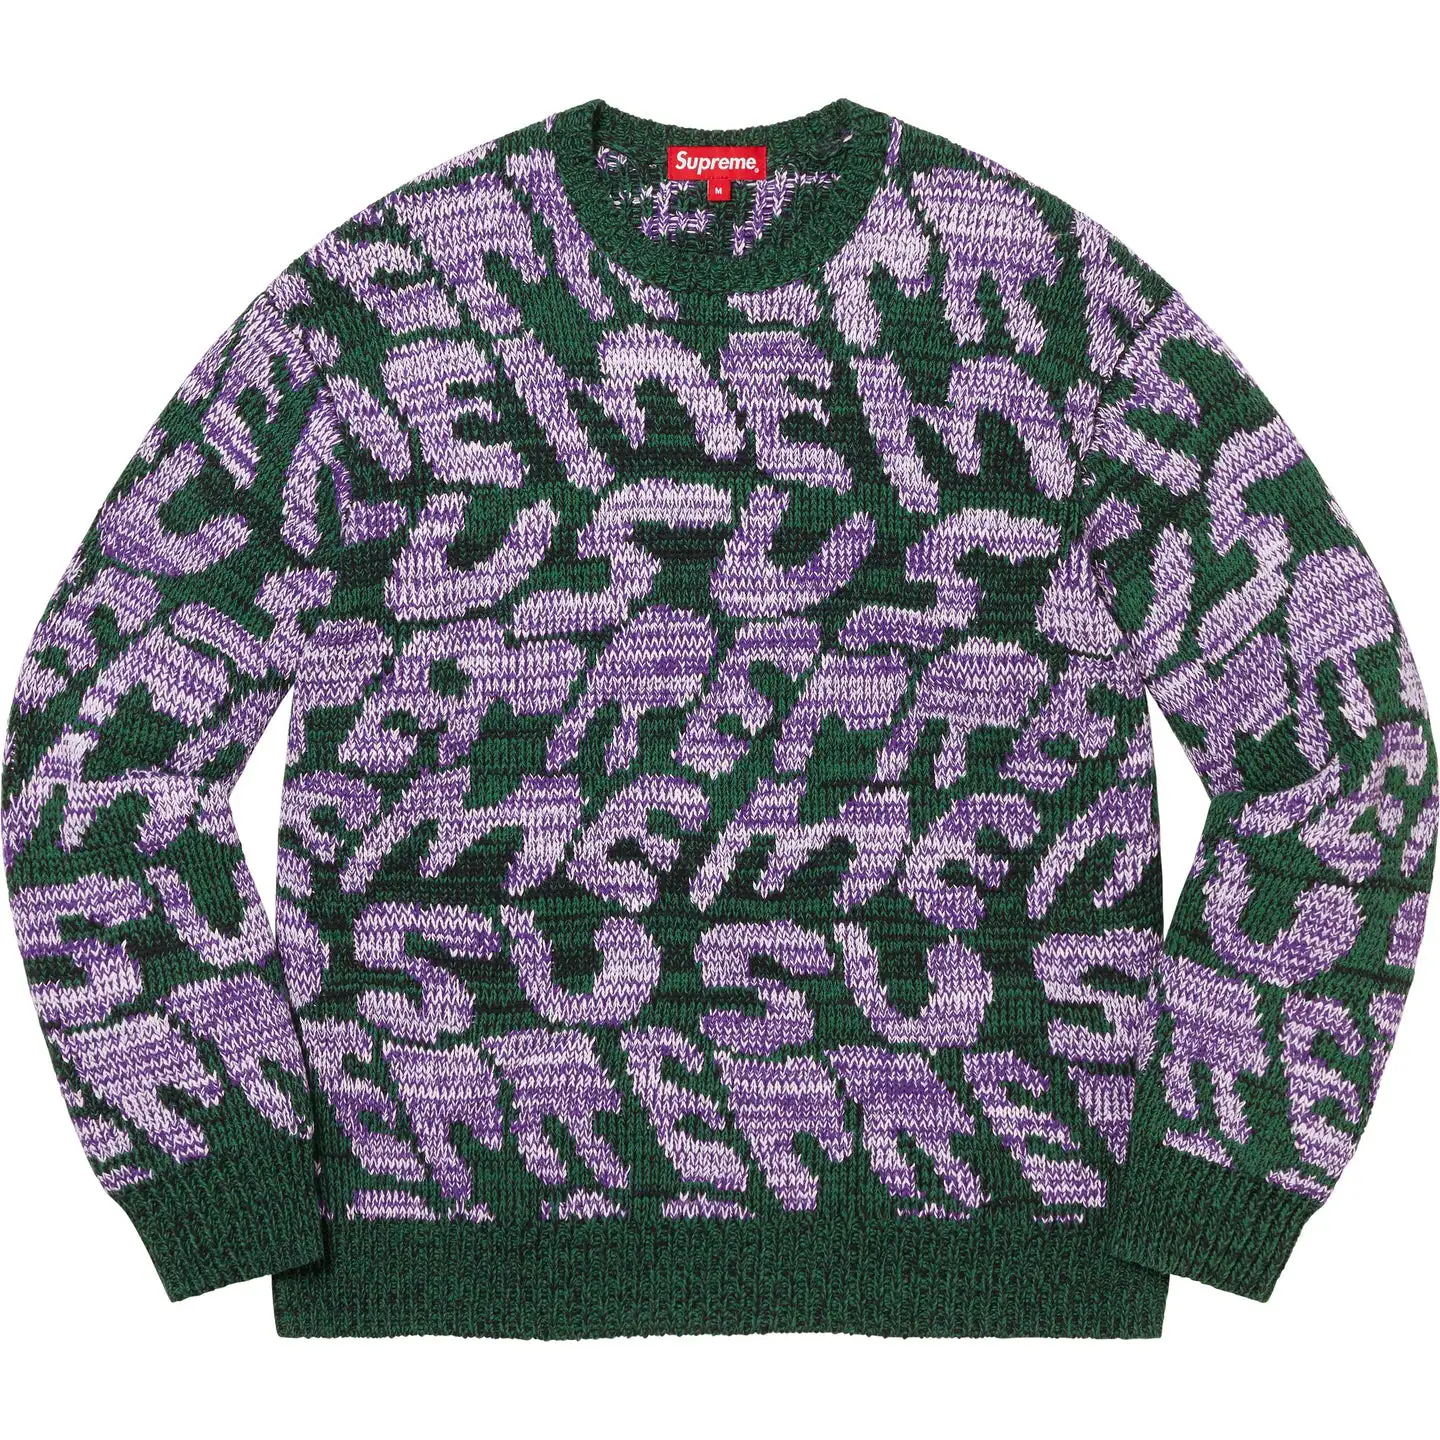 Supreme Stacked Sweater